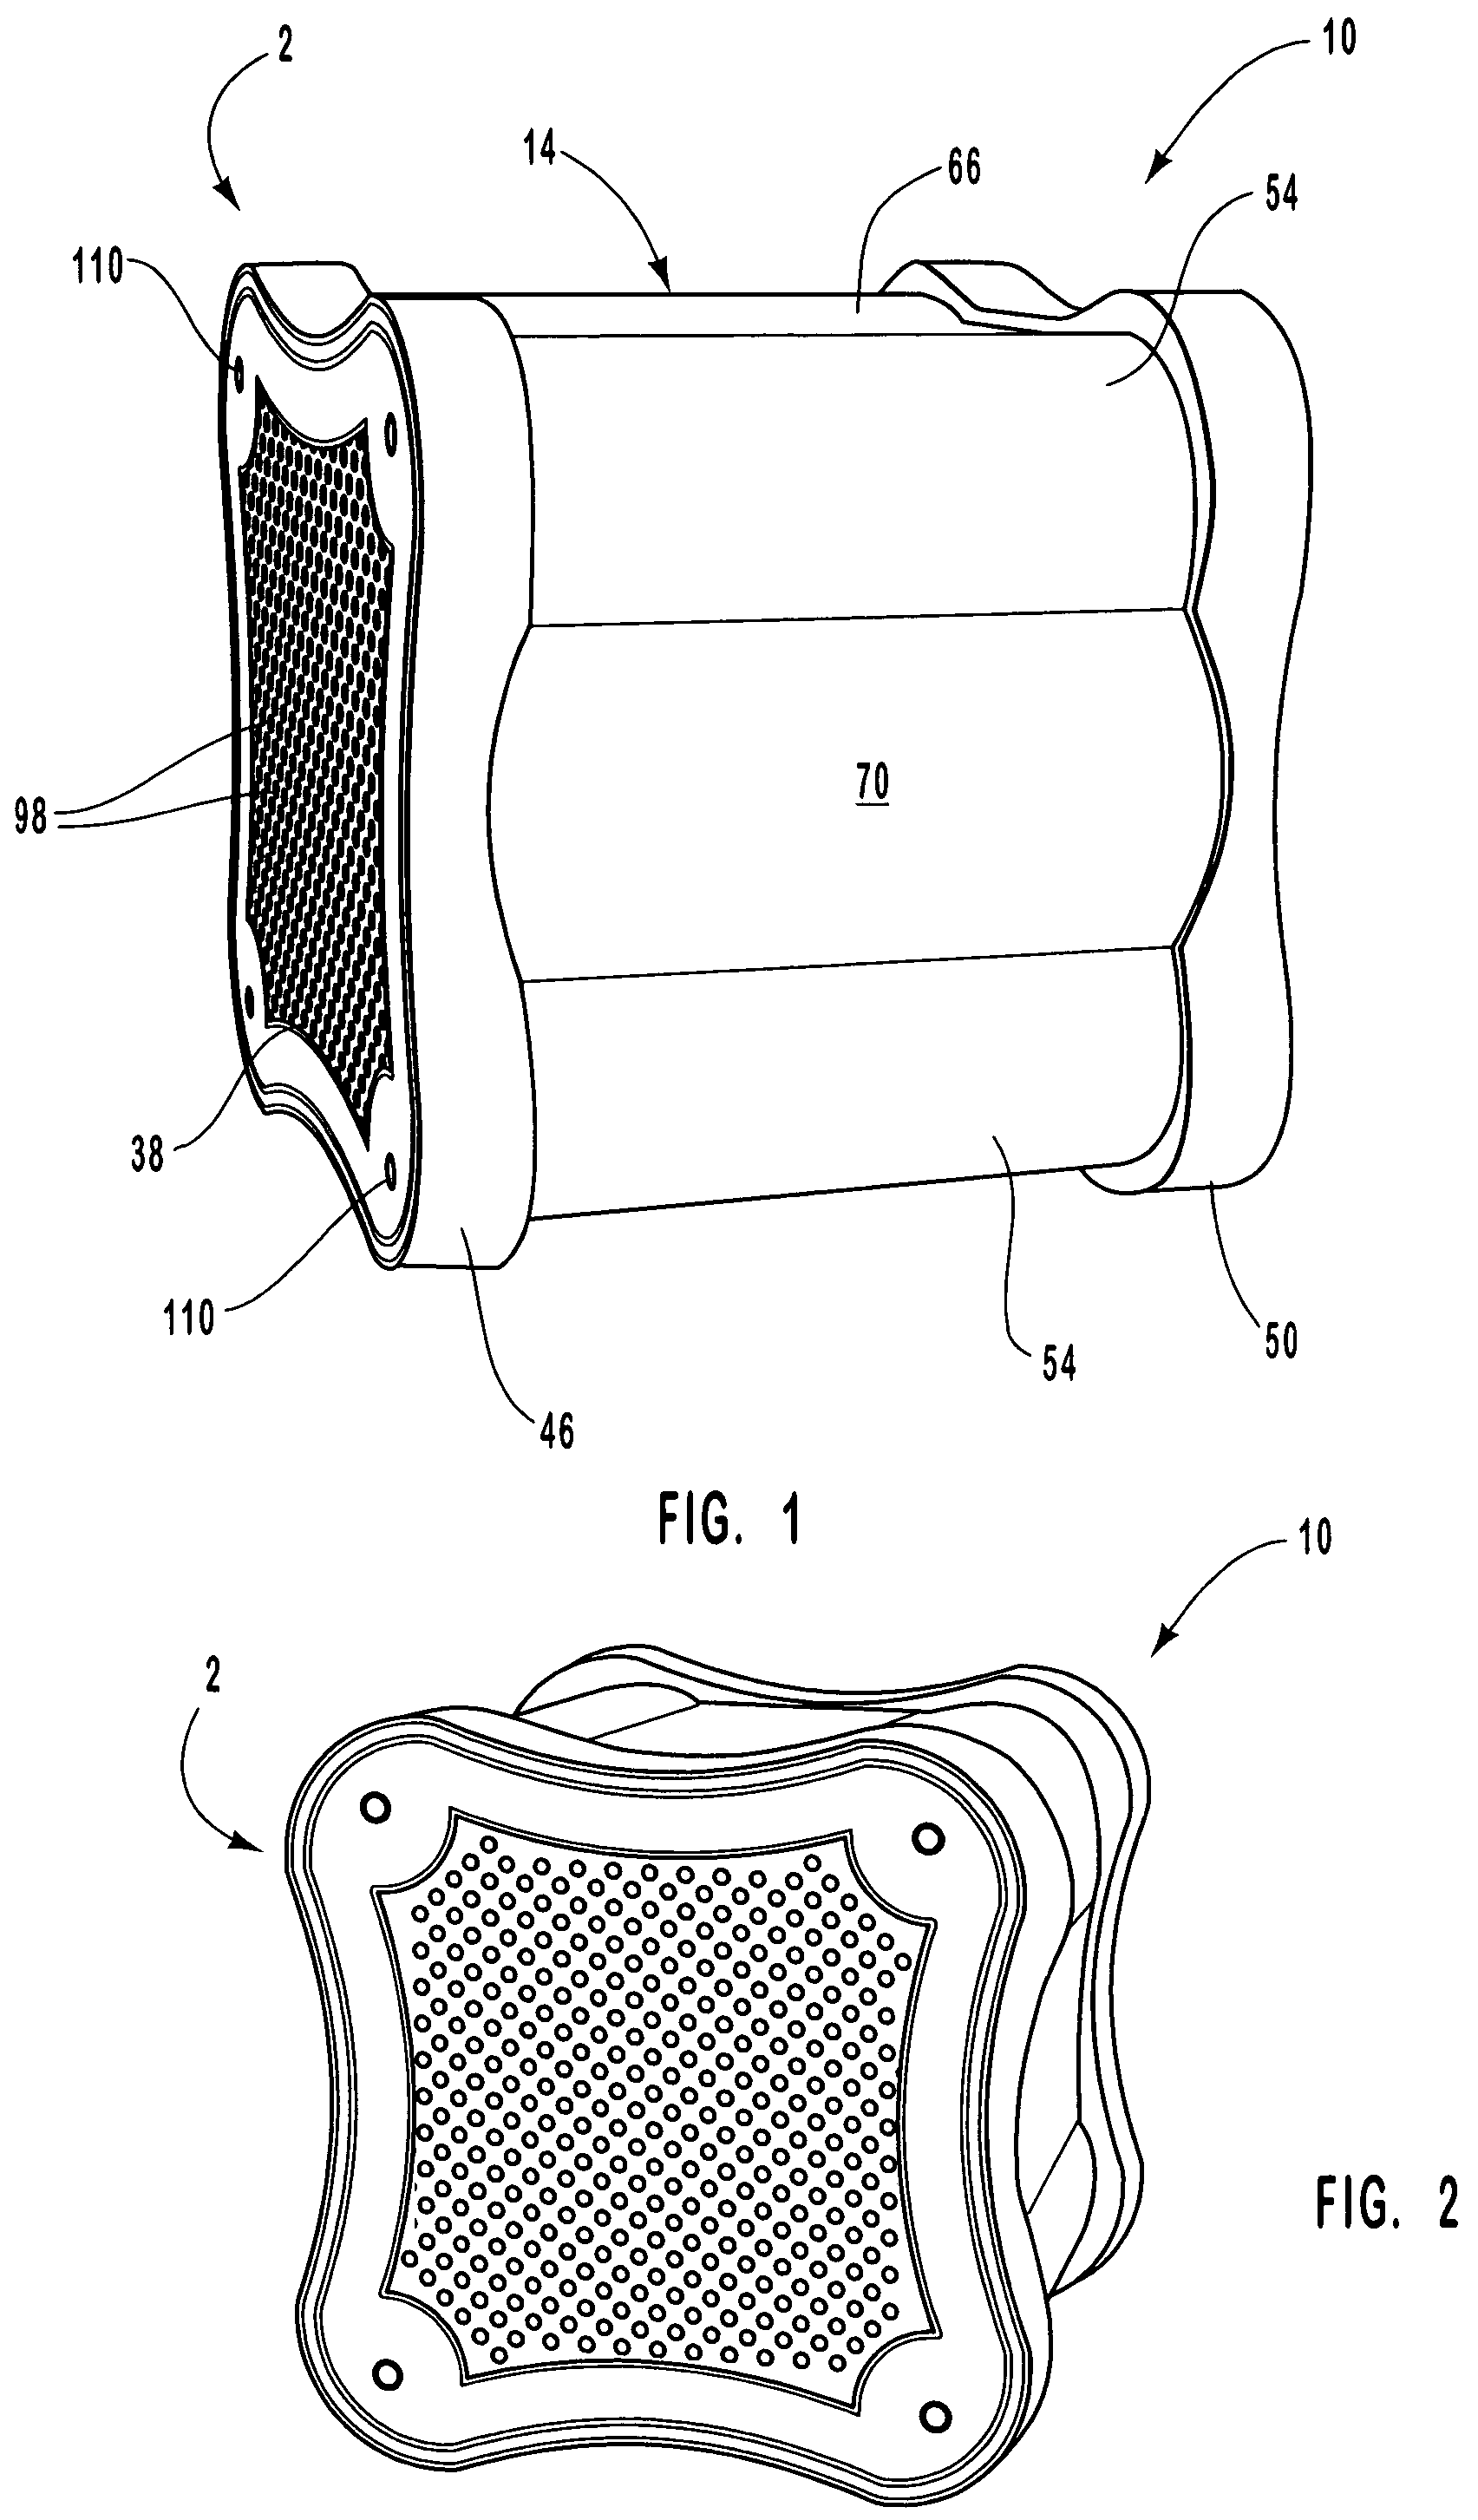 Non-peripherals processing control module having improved heat dissipating properties